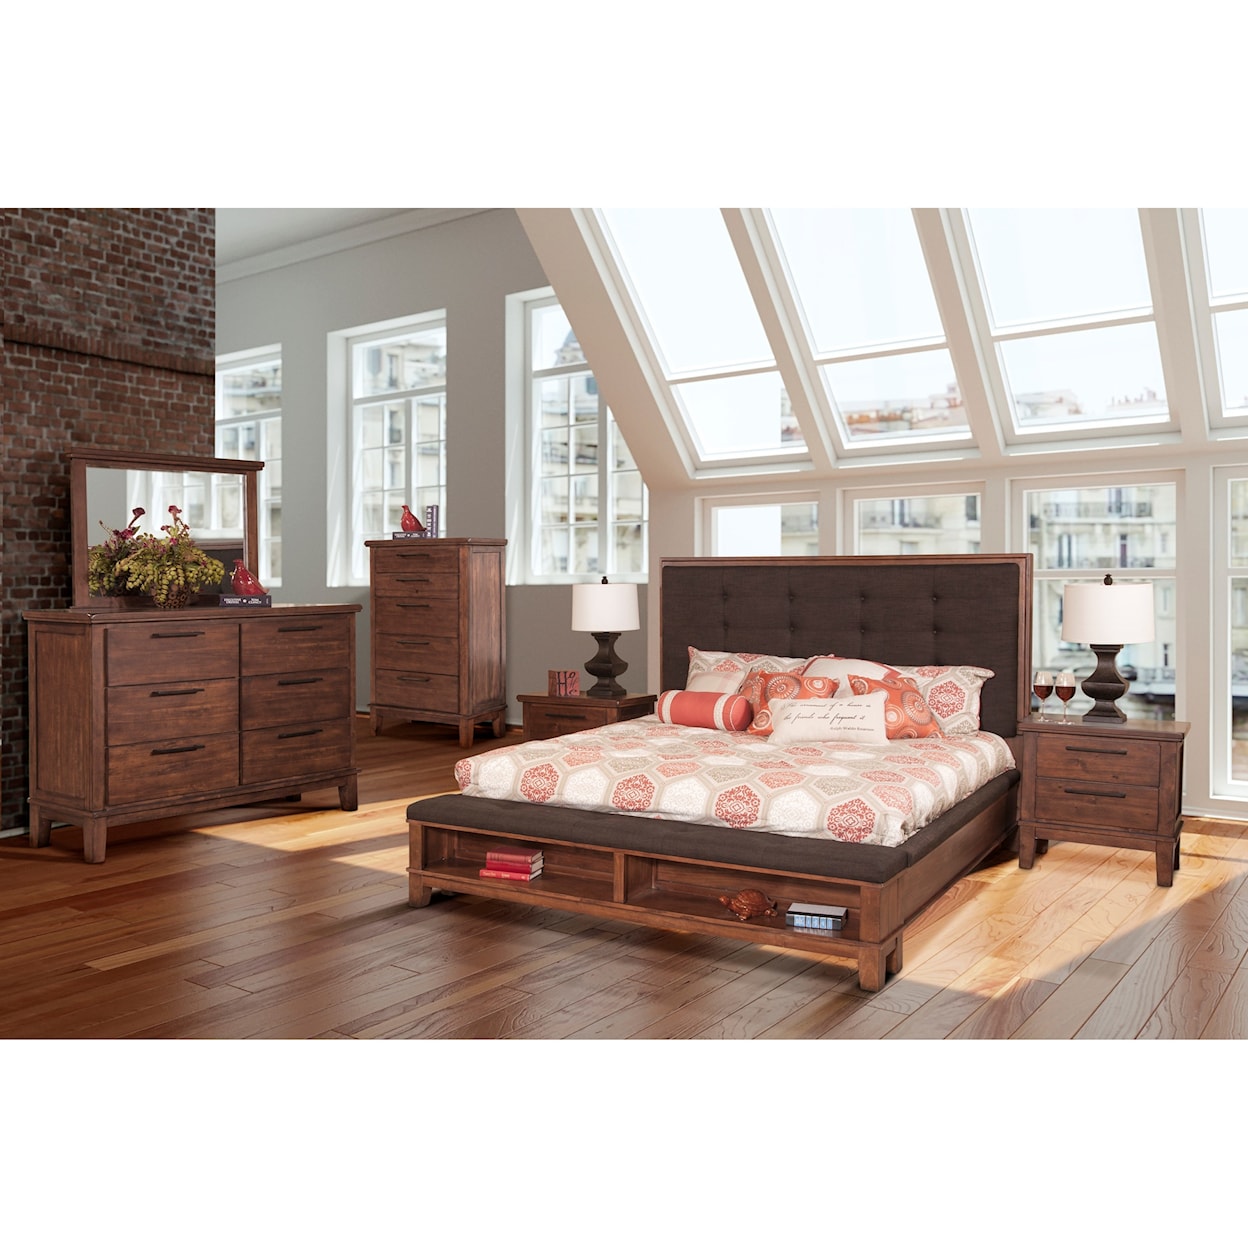 New Classic Cagney King Bedroom Group